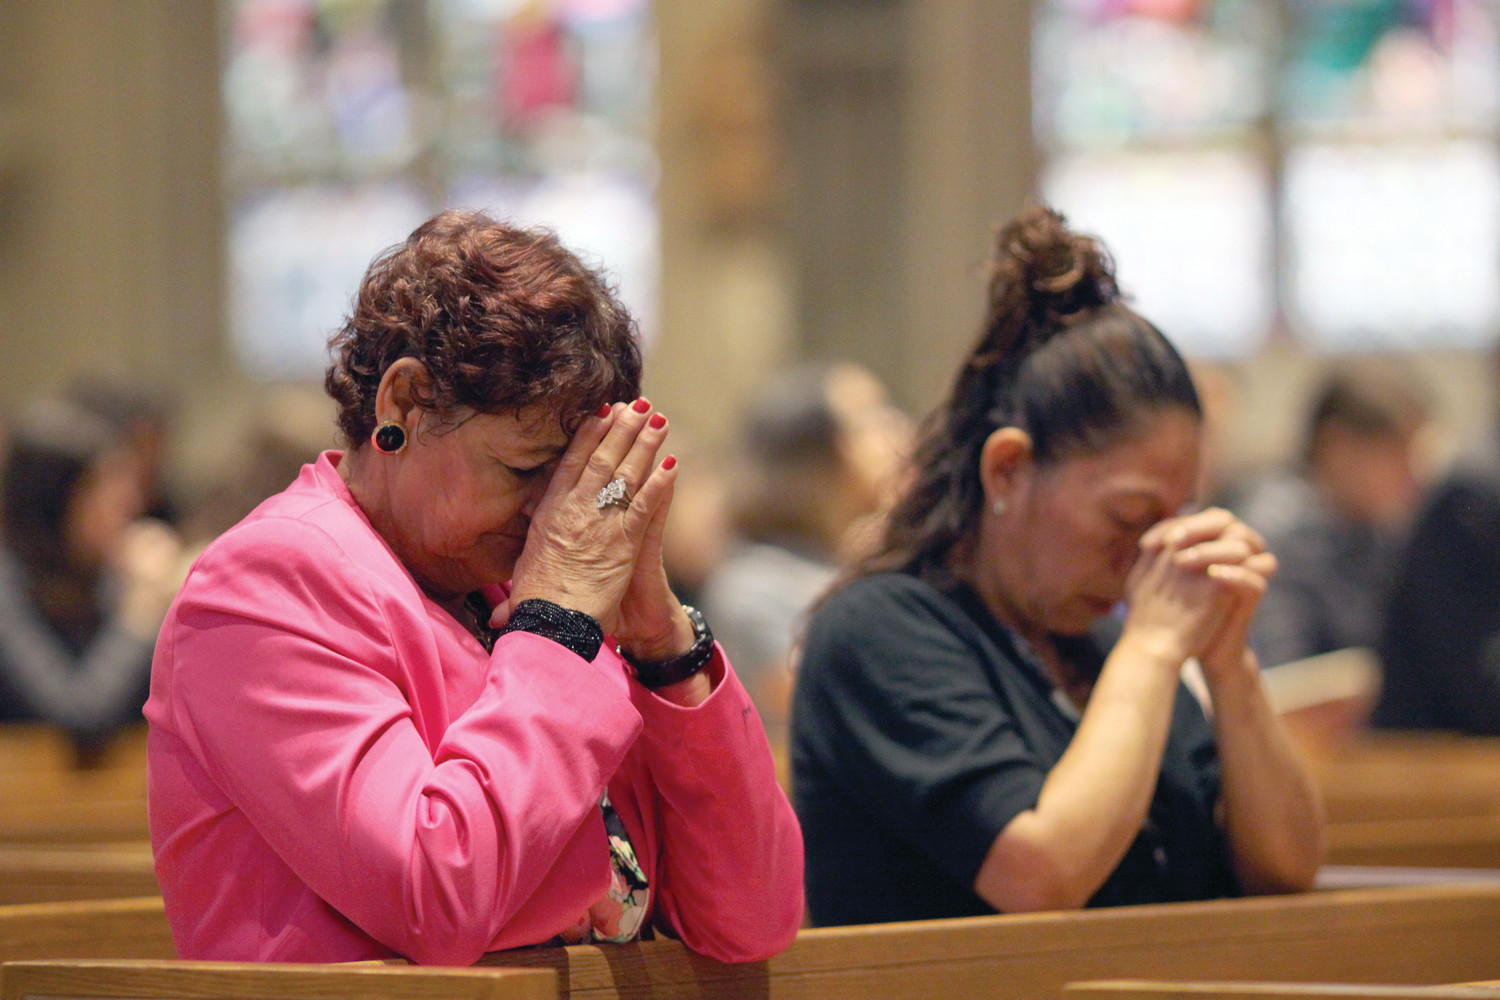 On Sunday, October 15 at the Cathedral of Saints Peter and Paul, women kneel in prayer during a Mass for those affected by recent tragedies throughout the world.